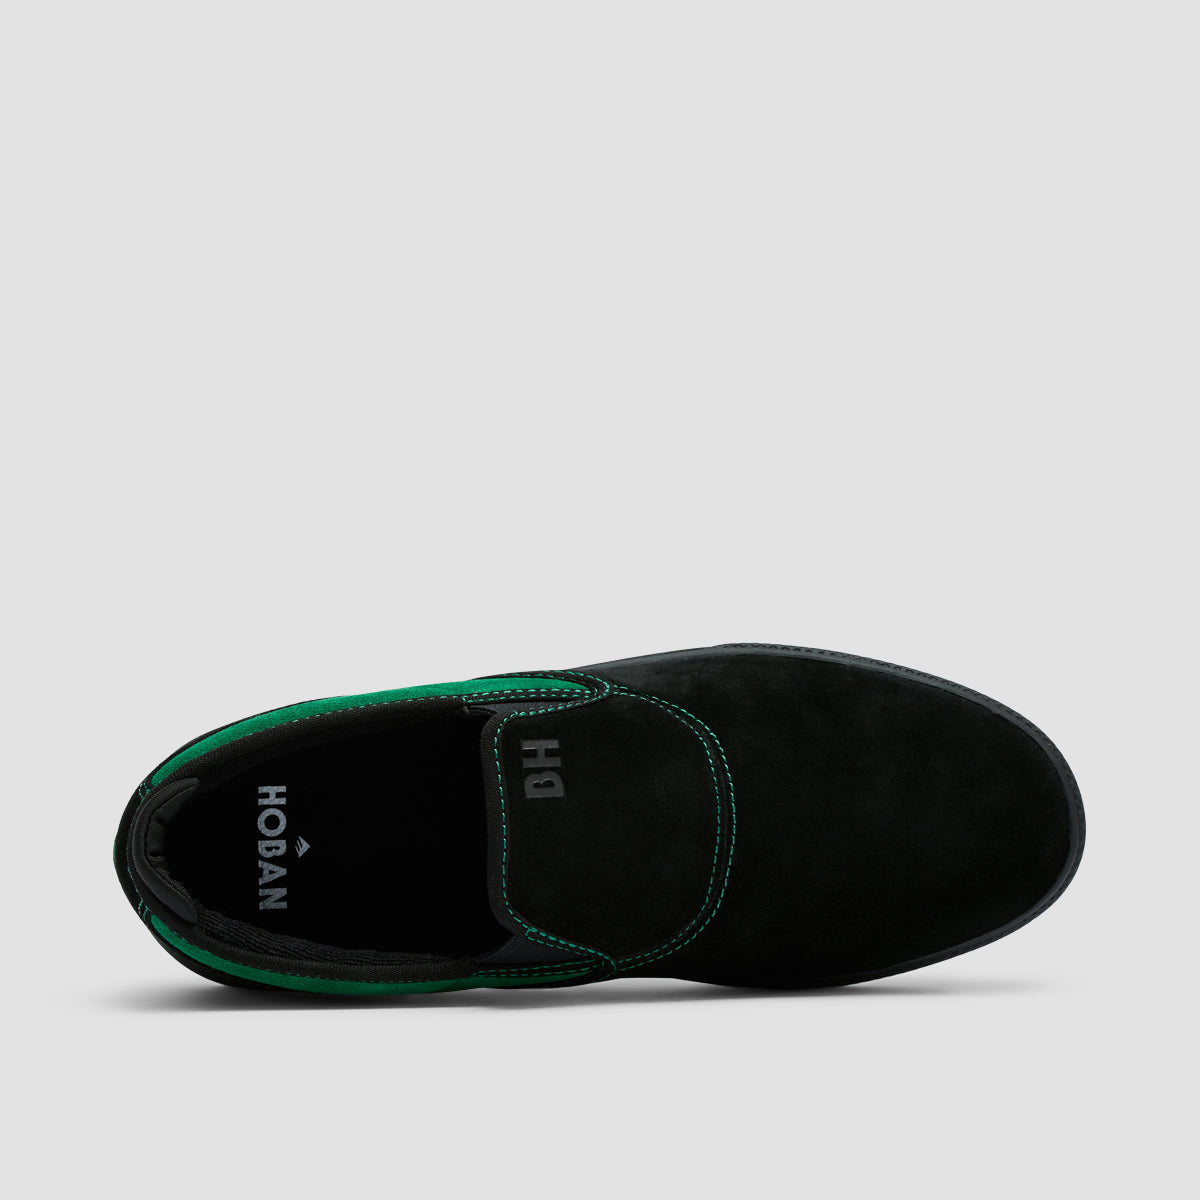 Emerica Wino G6 Cup Slip On Shoes Black/Green